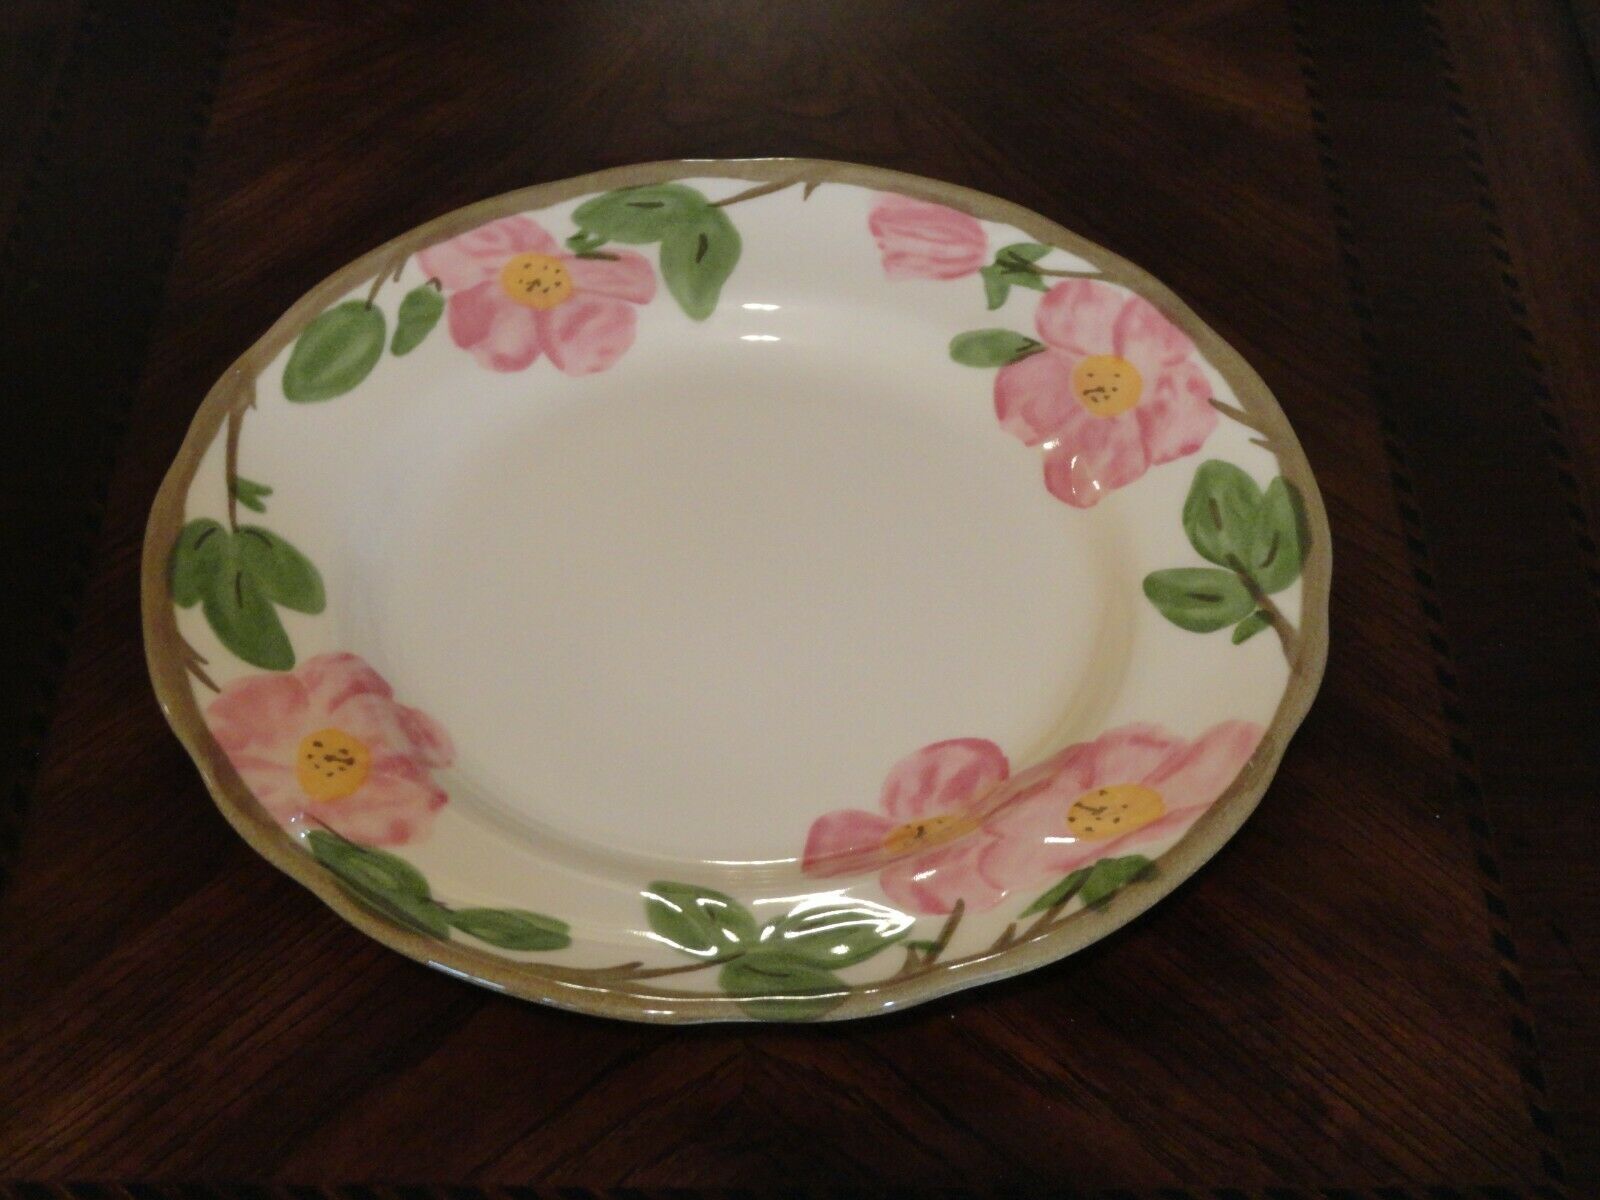 1995 Franciscan Johnson Bros PLATE Authentic Hand Decorated DESERT ROSE England